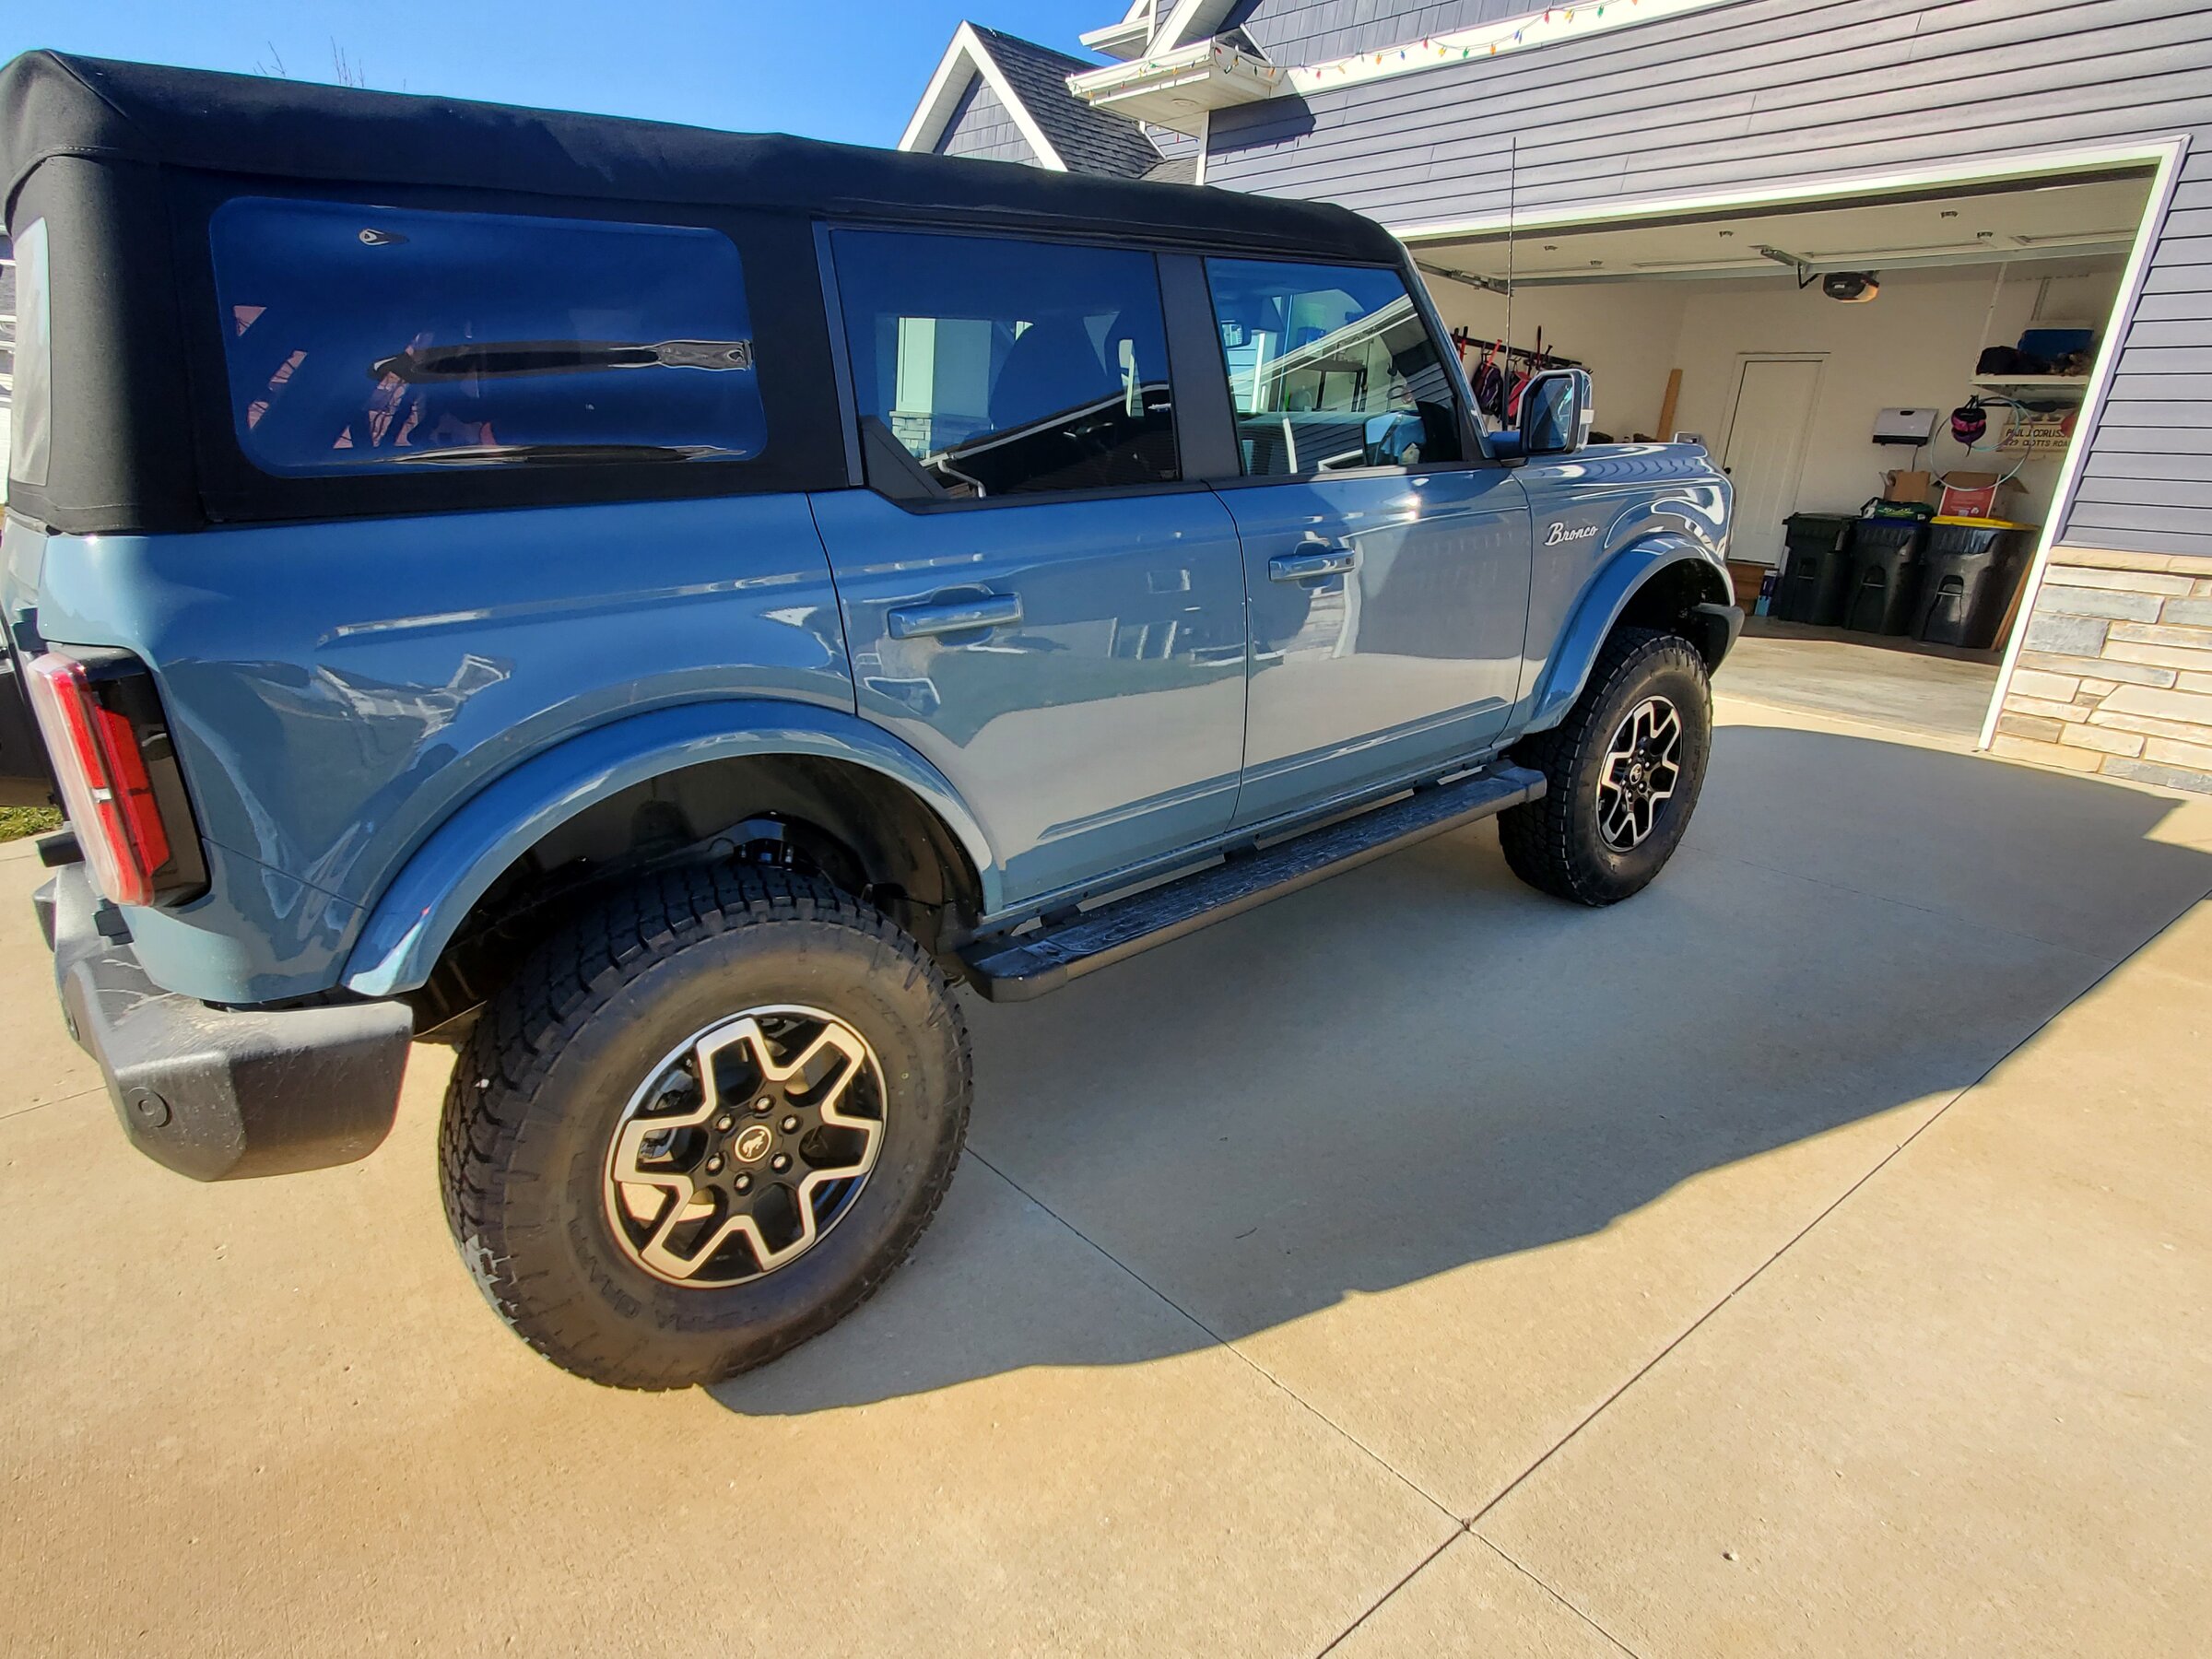 Ford Bronco OBX lifted and new tires - Rough Country 3.5" lift and 285/75R18 on the stock rims 20211216_130626